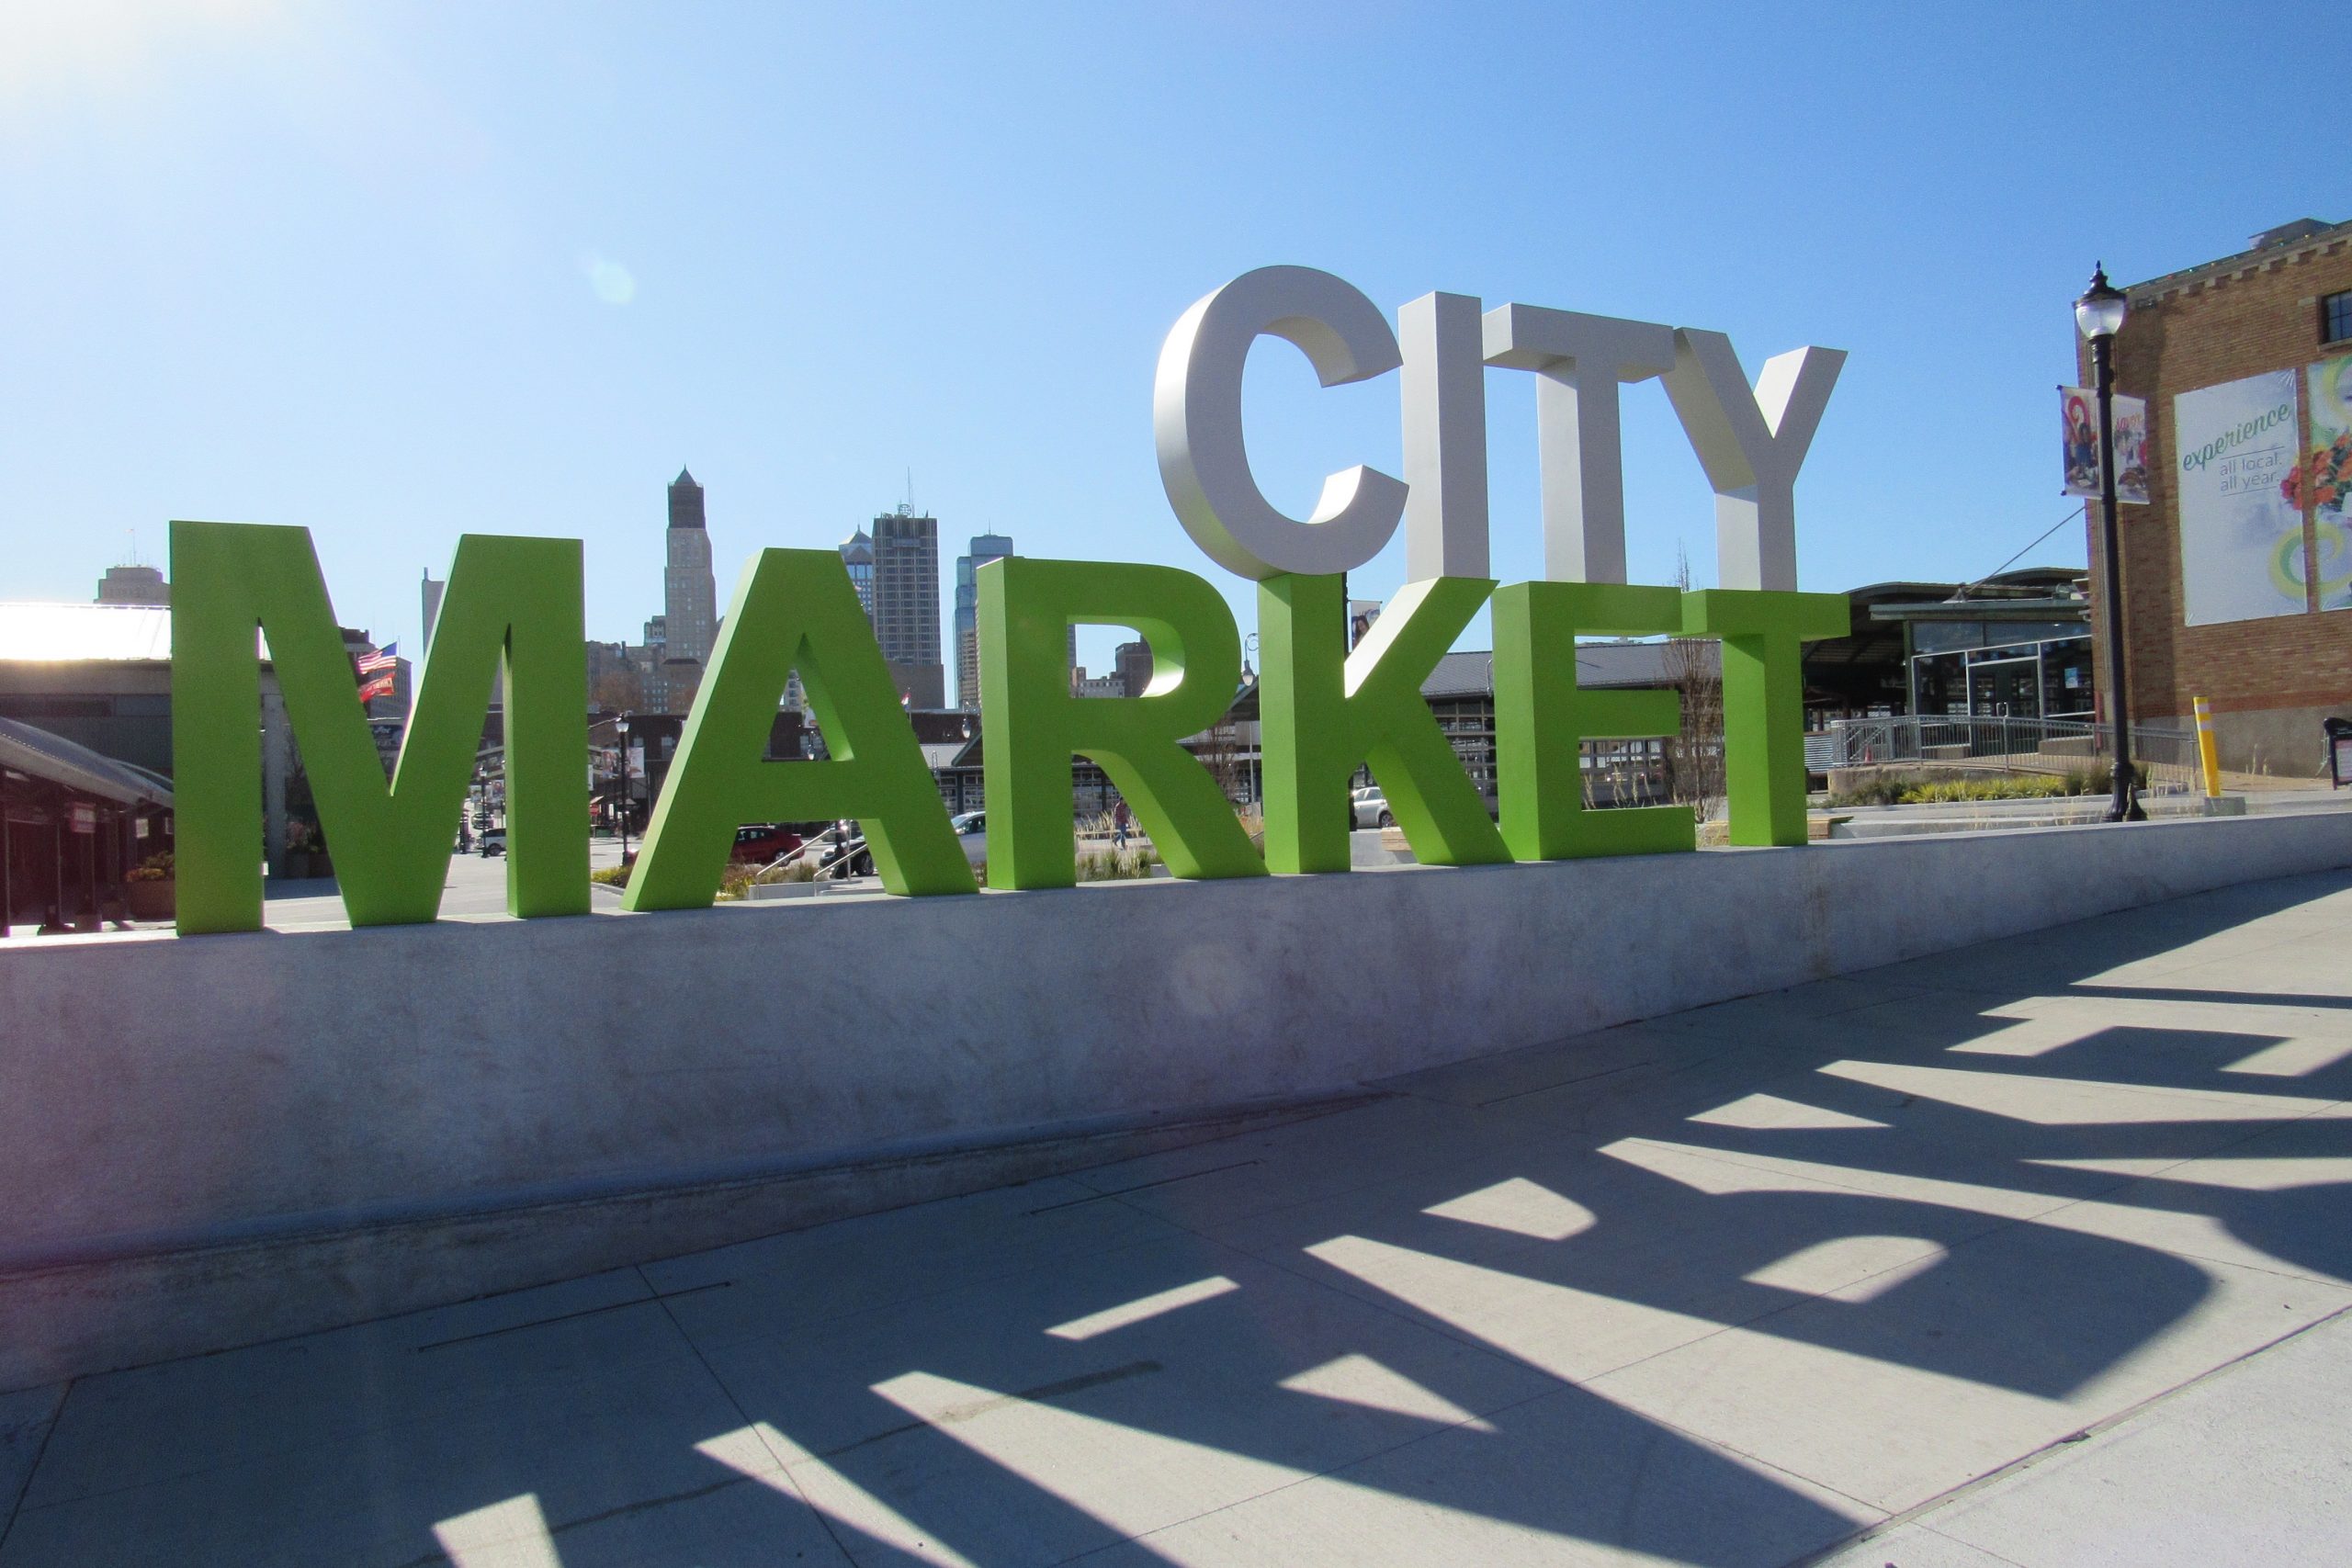 City market sign at the River Market in Kansas City with shadows